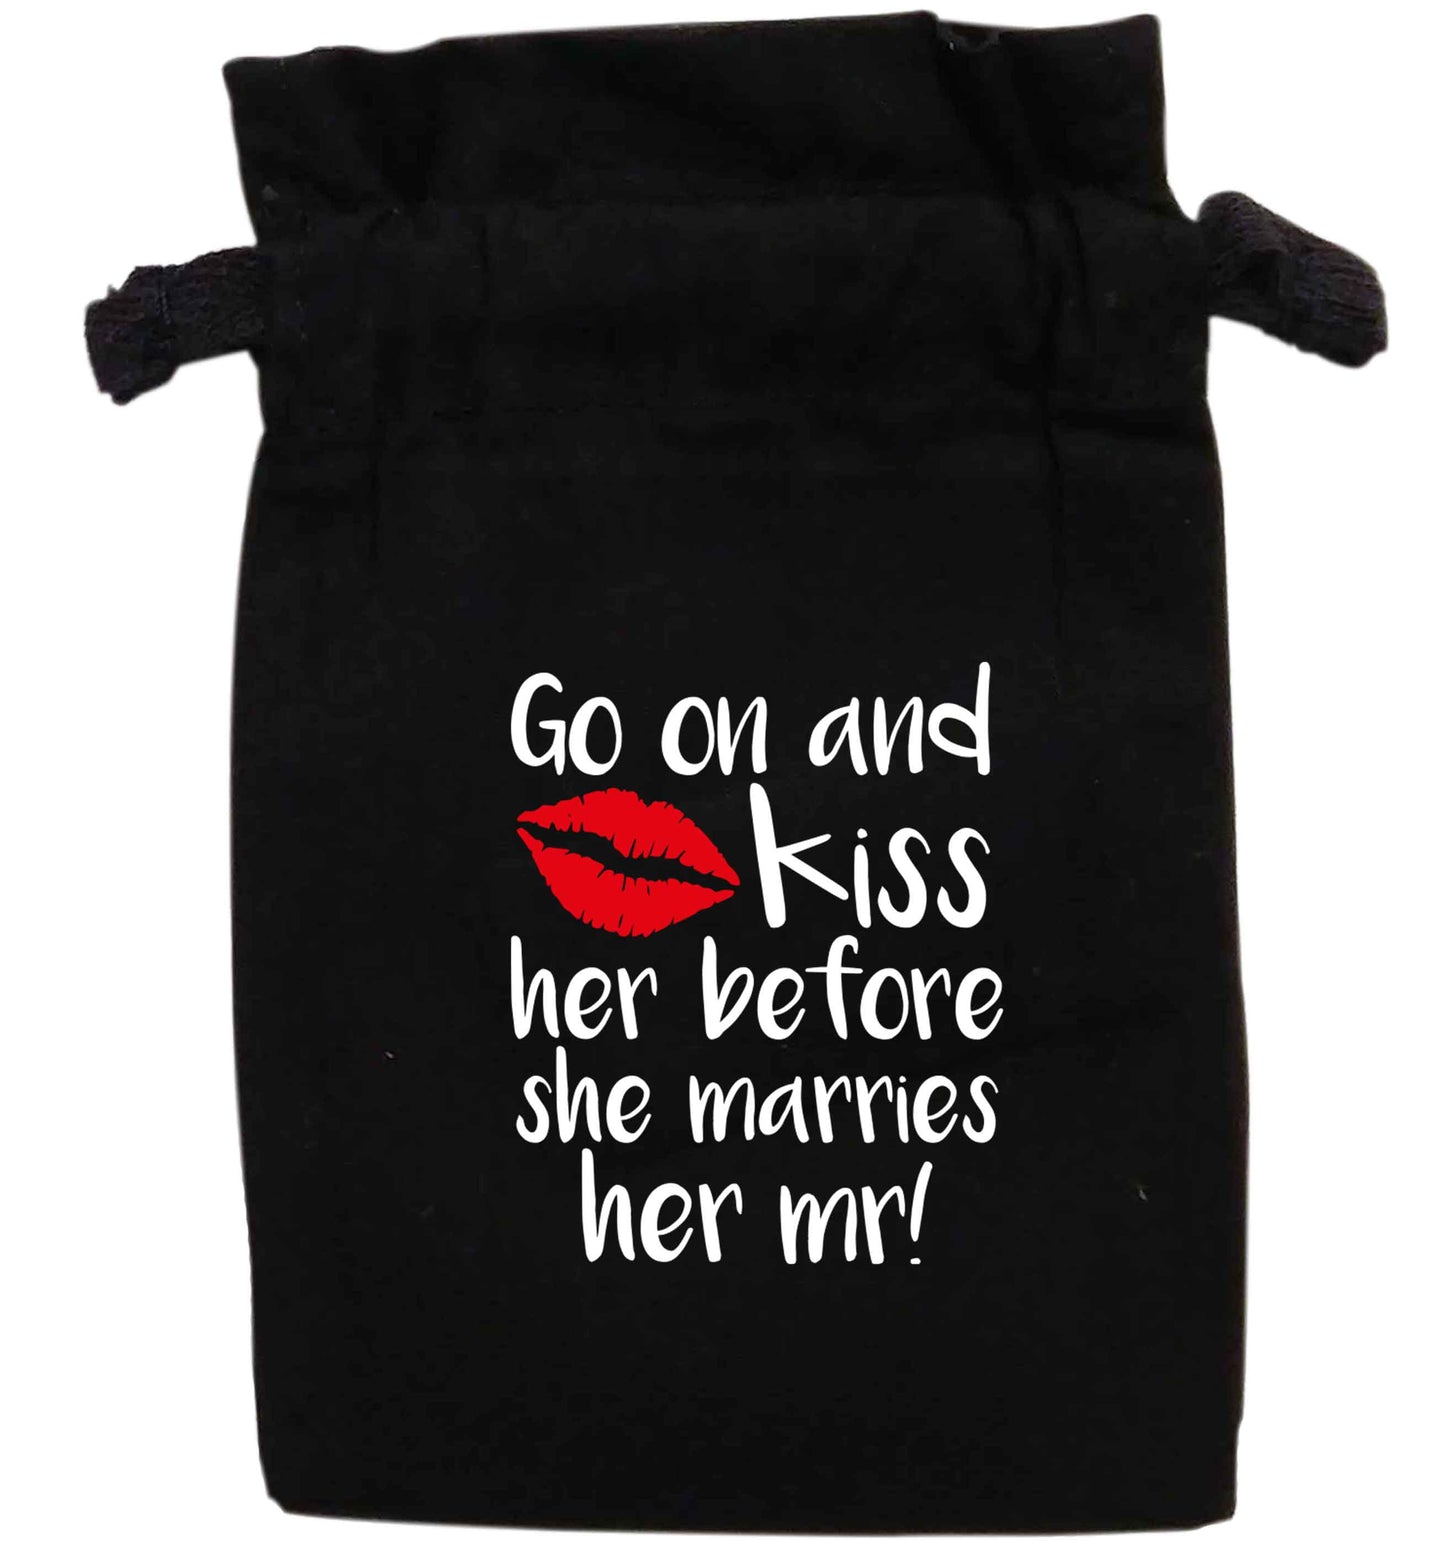 Kiss her before she marries her mr! | XS - L | Pouch / Drawstring bag / Sack | Organic Cotton | Bulk discounts available!